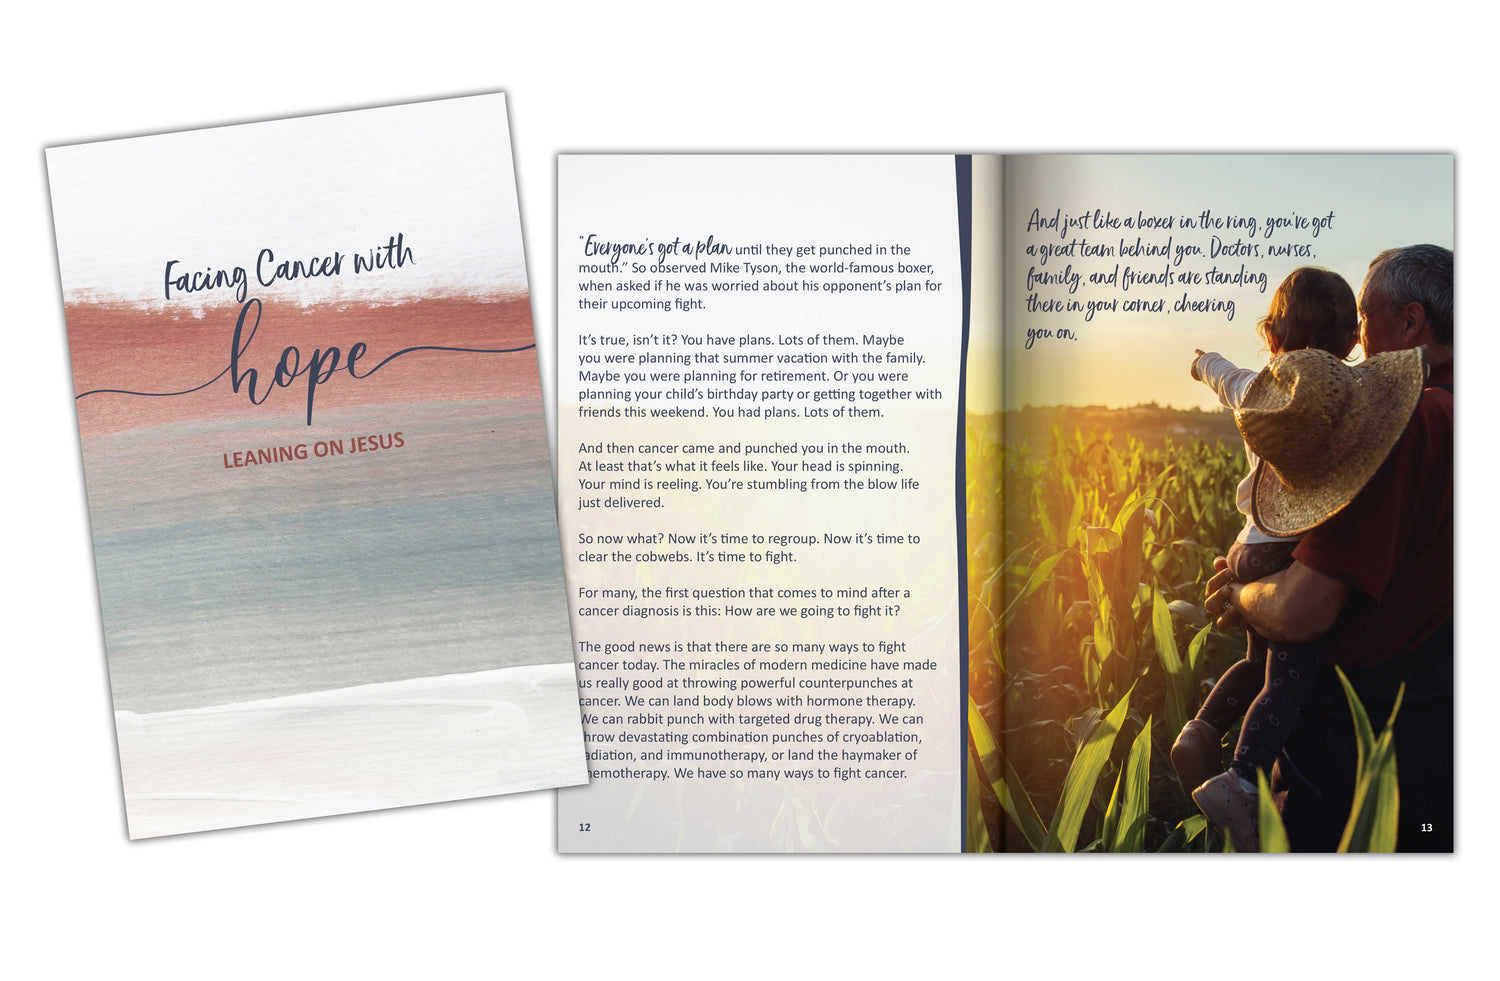 Facing Cancer with Hope Book